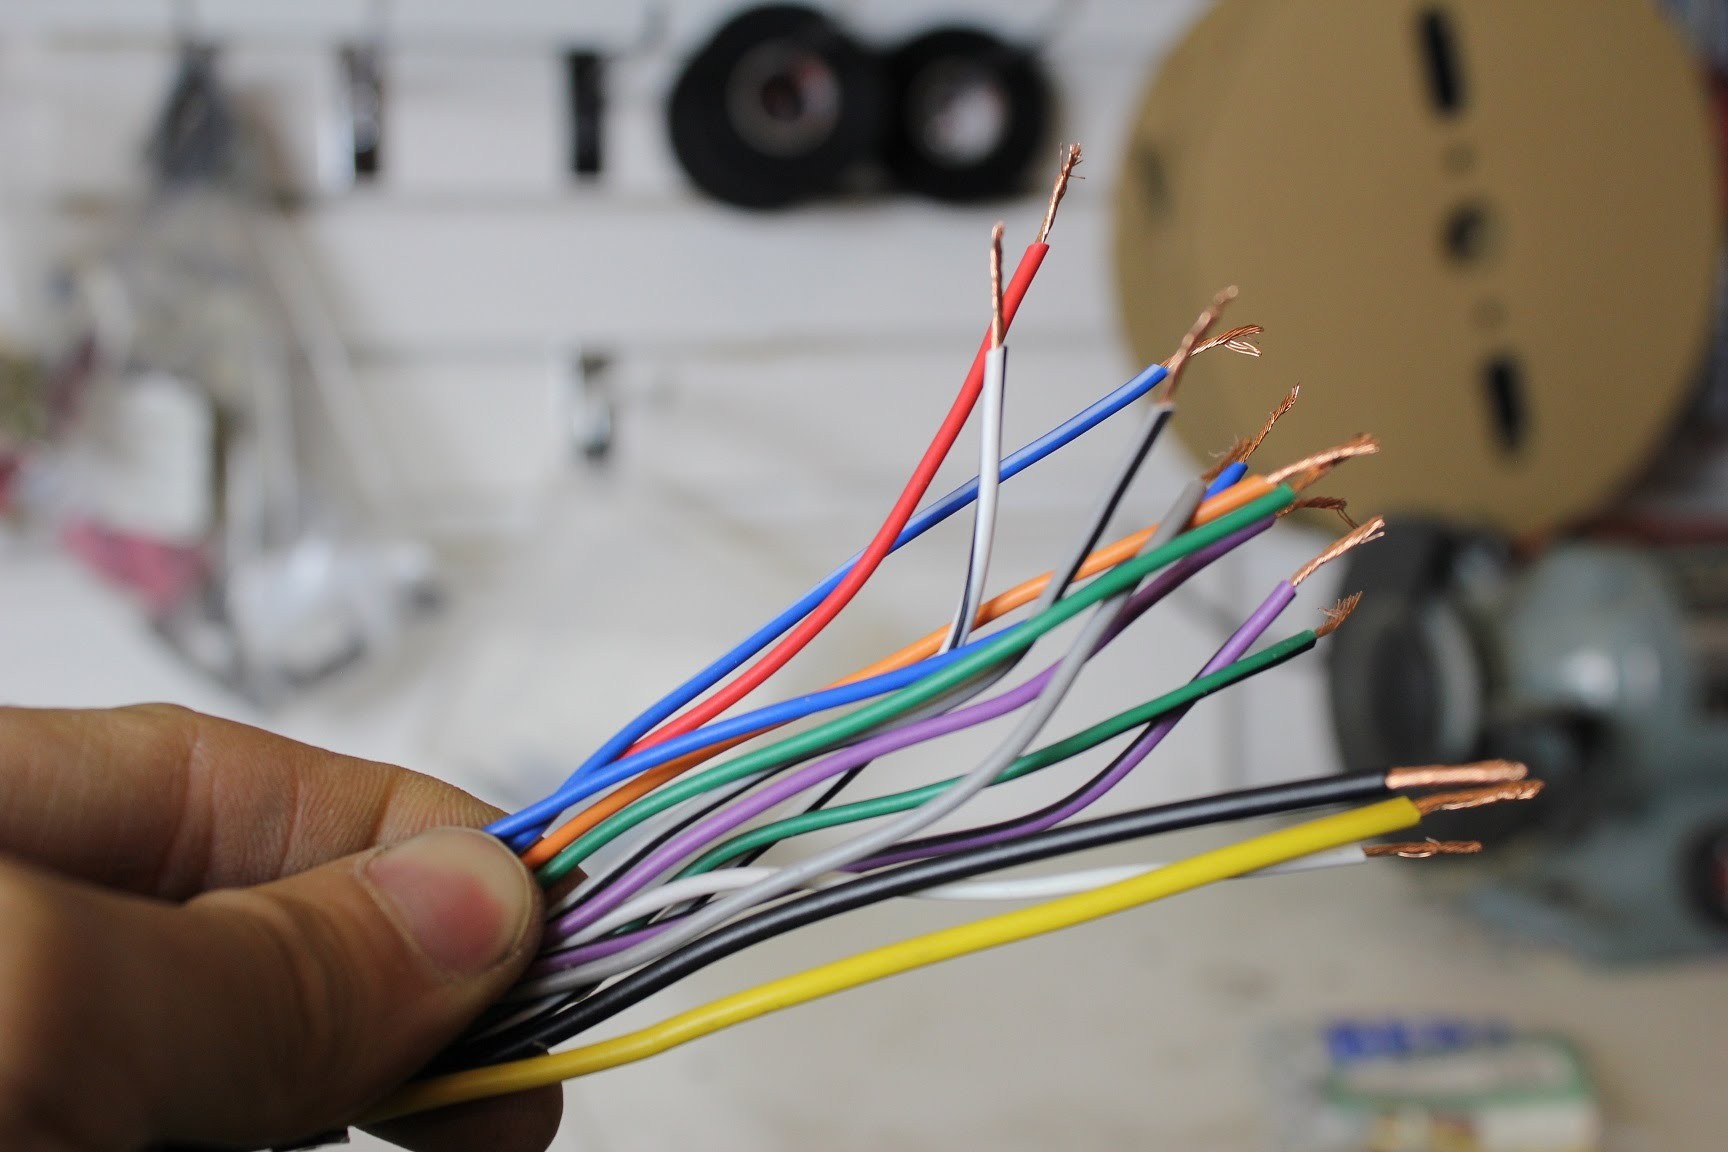 Wiring harness colours explained for a stereo The 12Volters